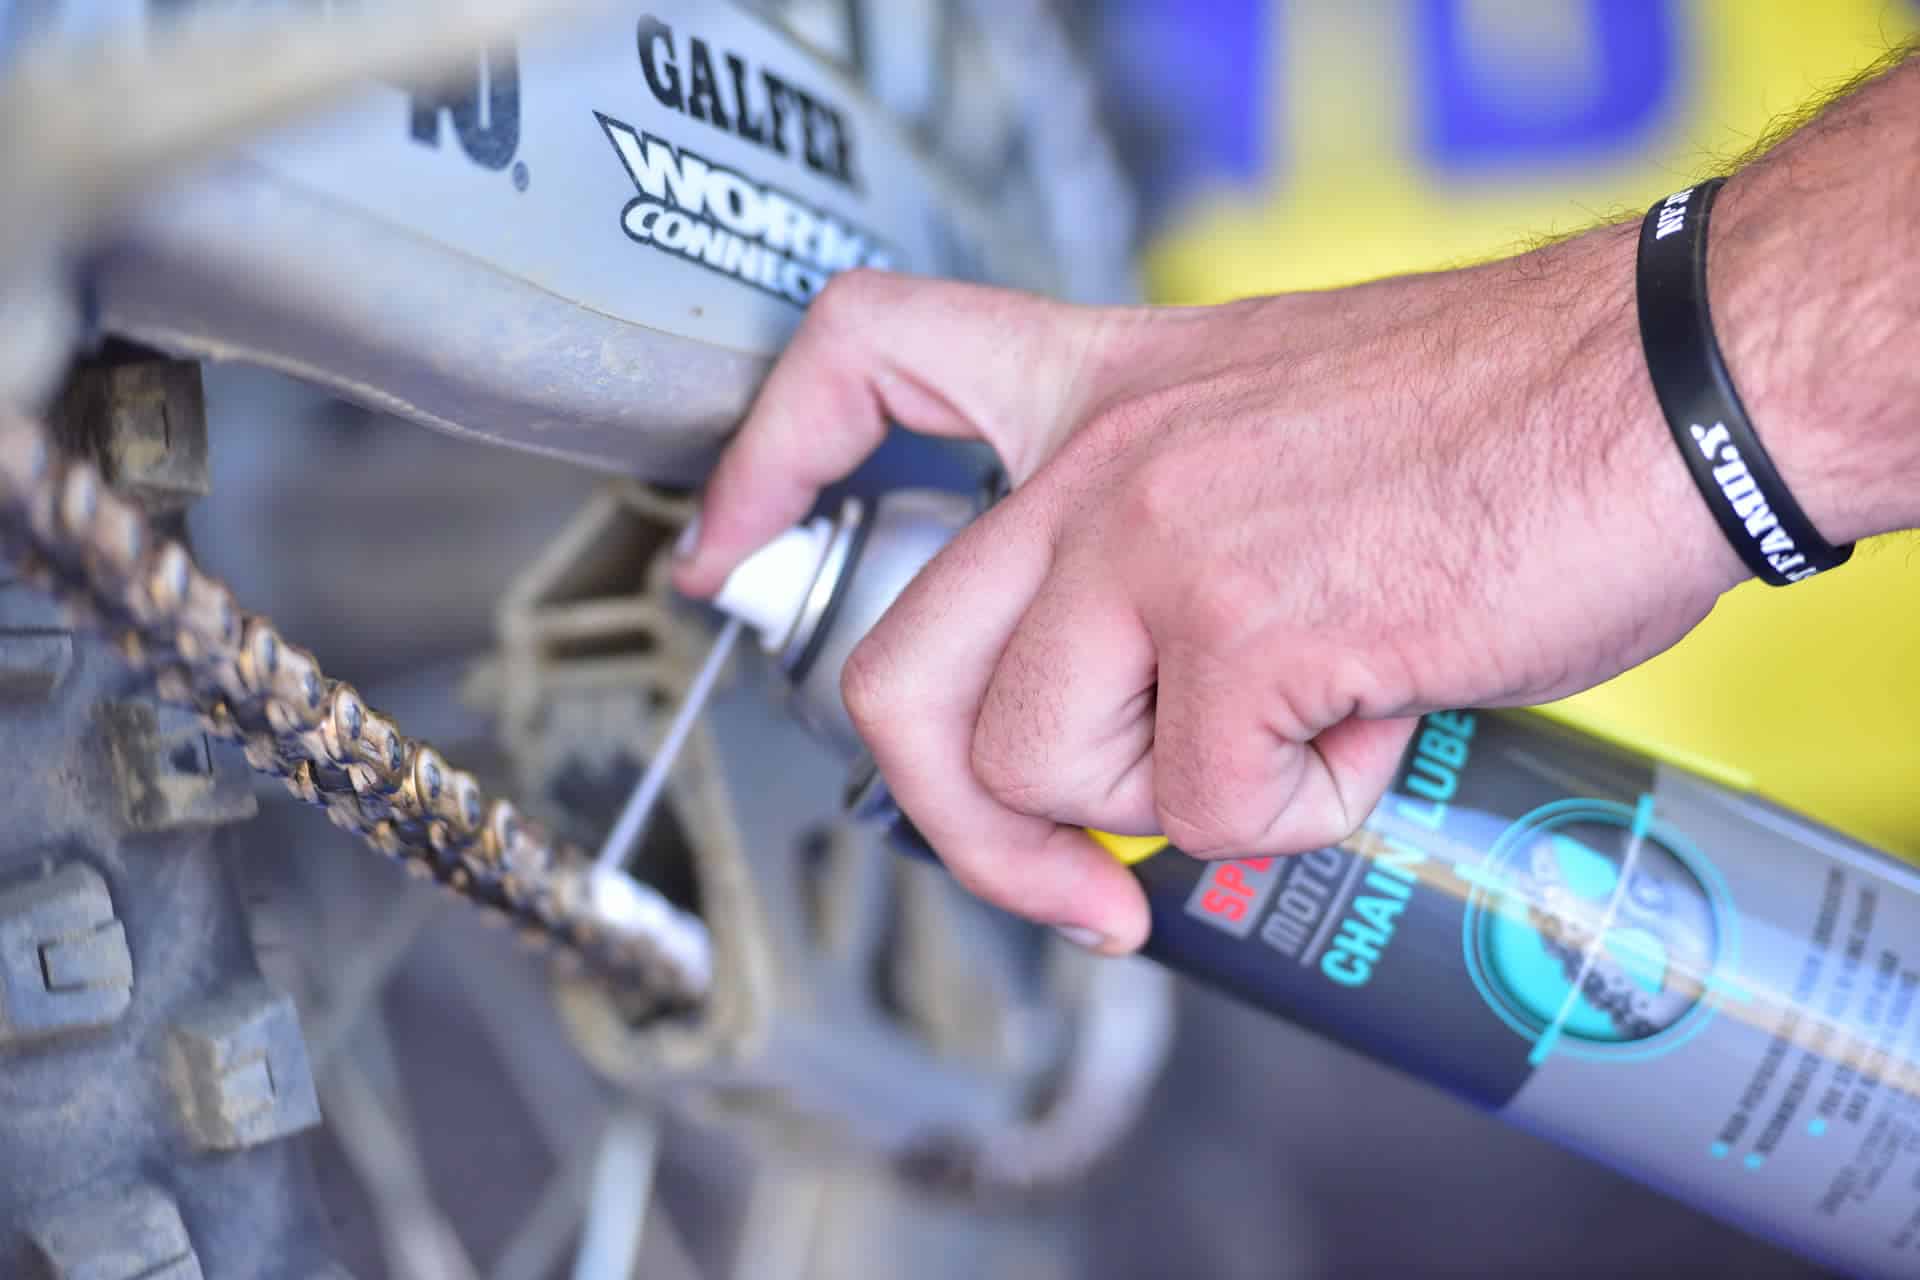 Wd 40 Specialist Motorbike Chain Cleaner Lube Bike Care Feature